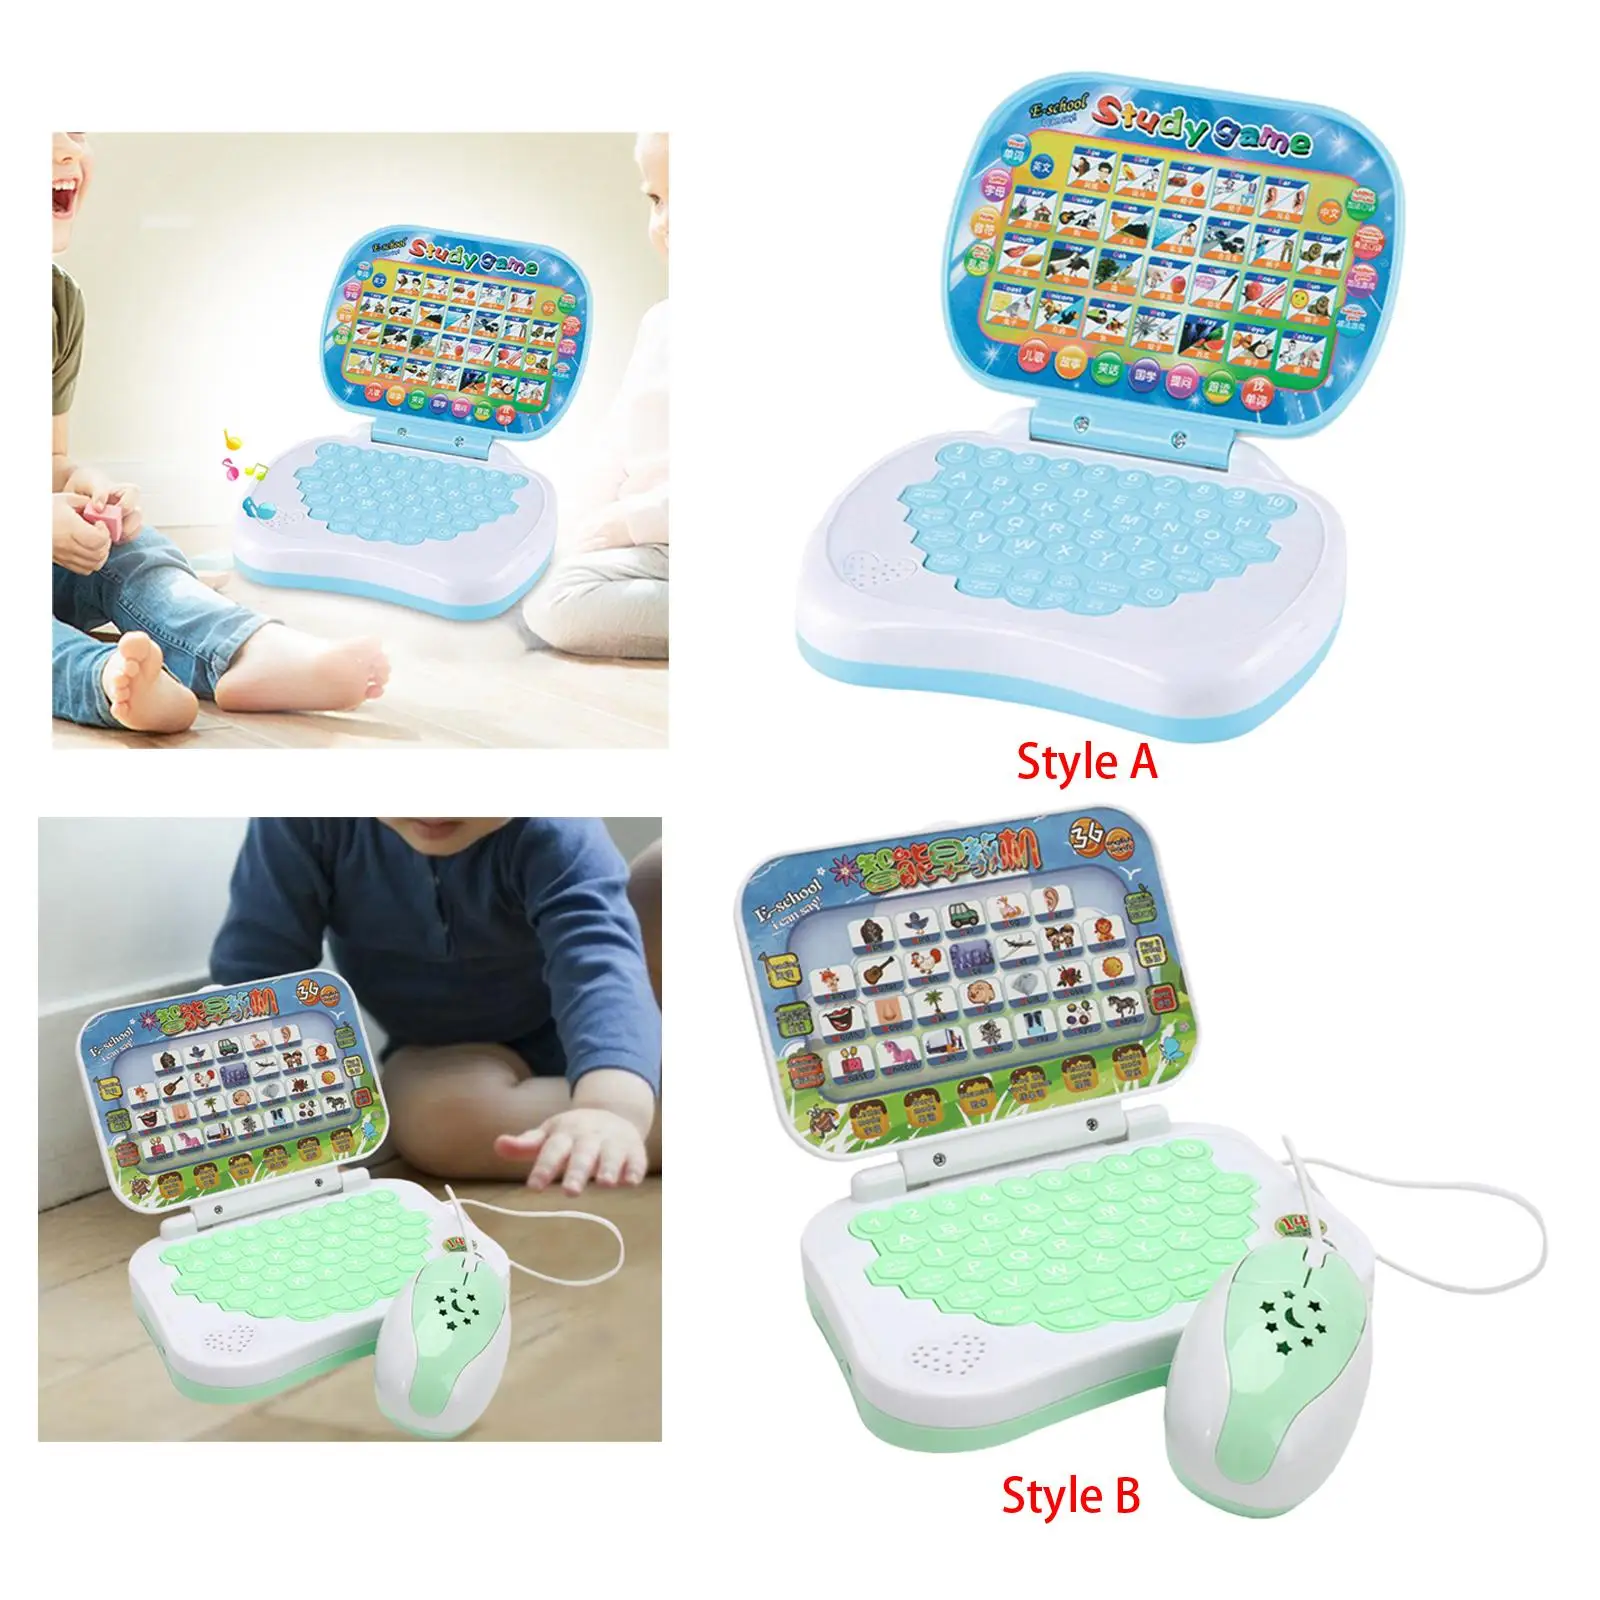 Multifunction Learning Machine Study Game Computer Activities Kids Laptop Toy for Toddler Kids Girls Boys Children Bithday Gifts